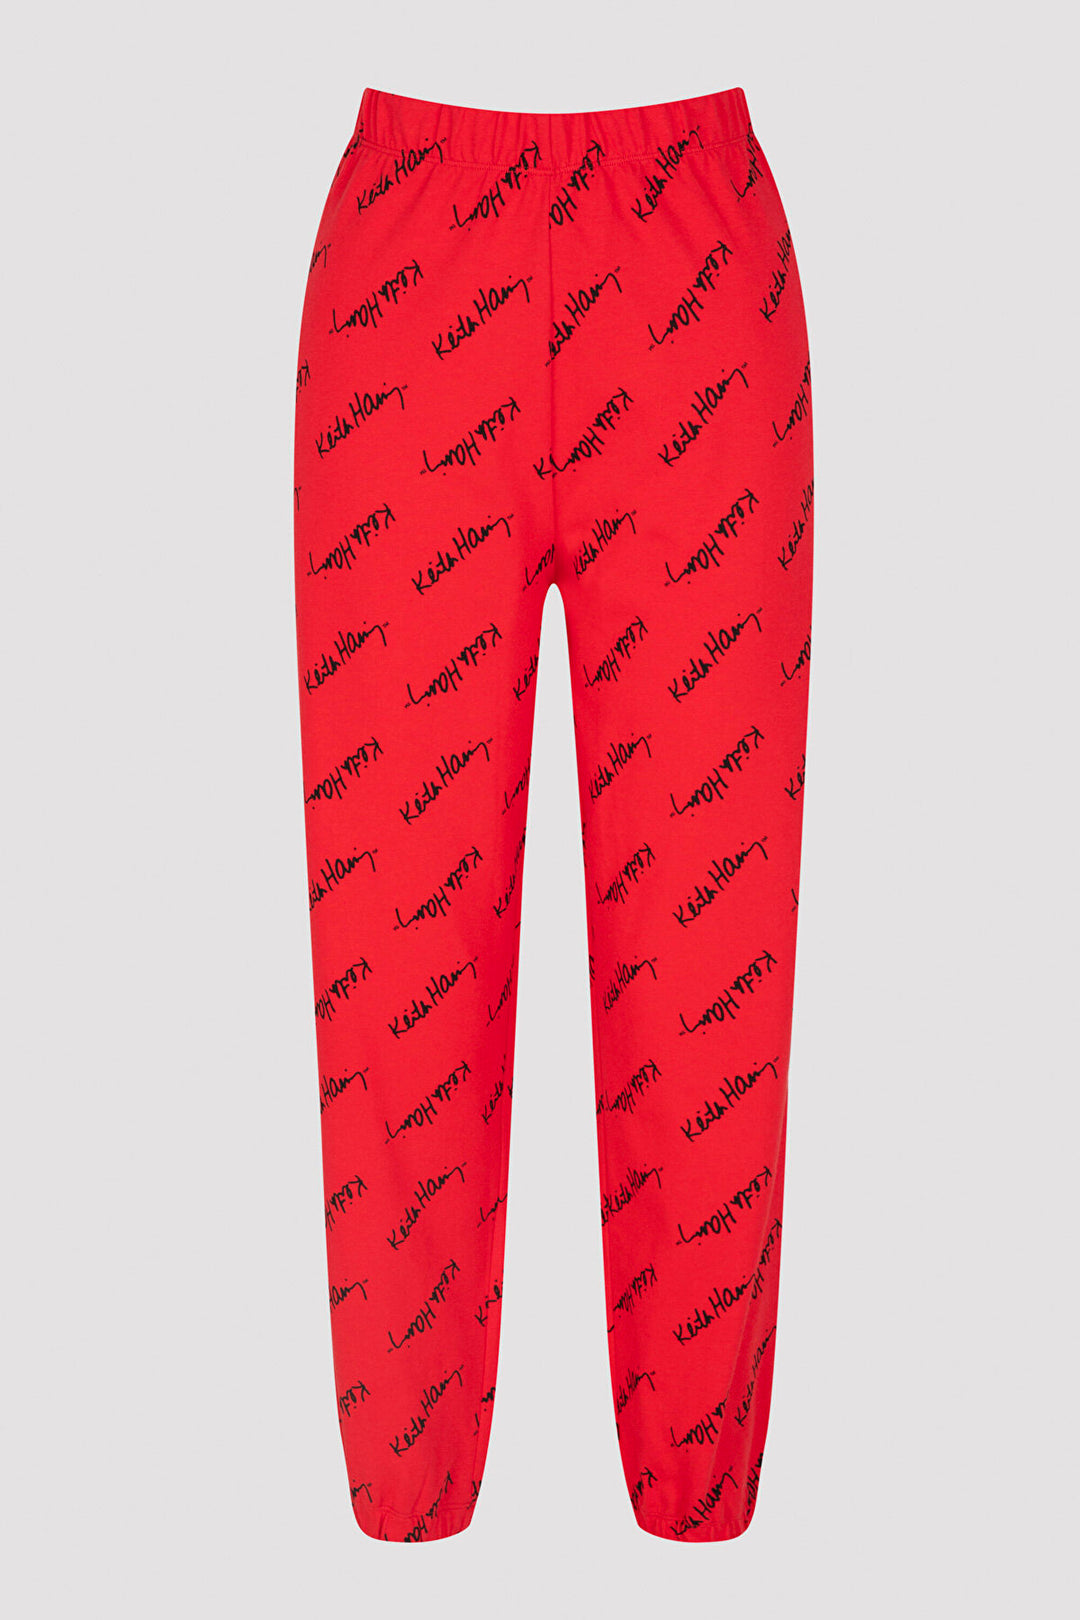 Cuffed Pants Pj Bottom-Keith Haring Collection